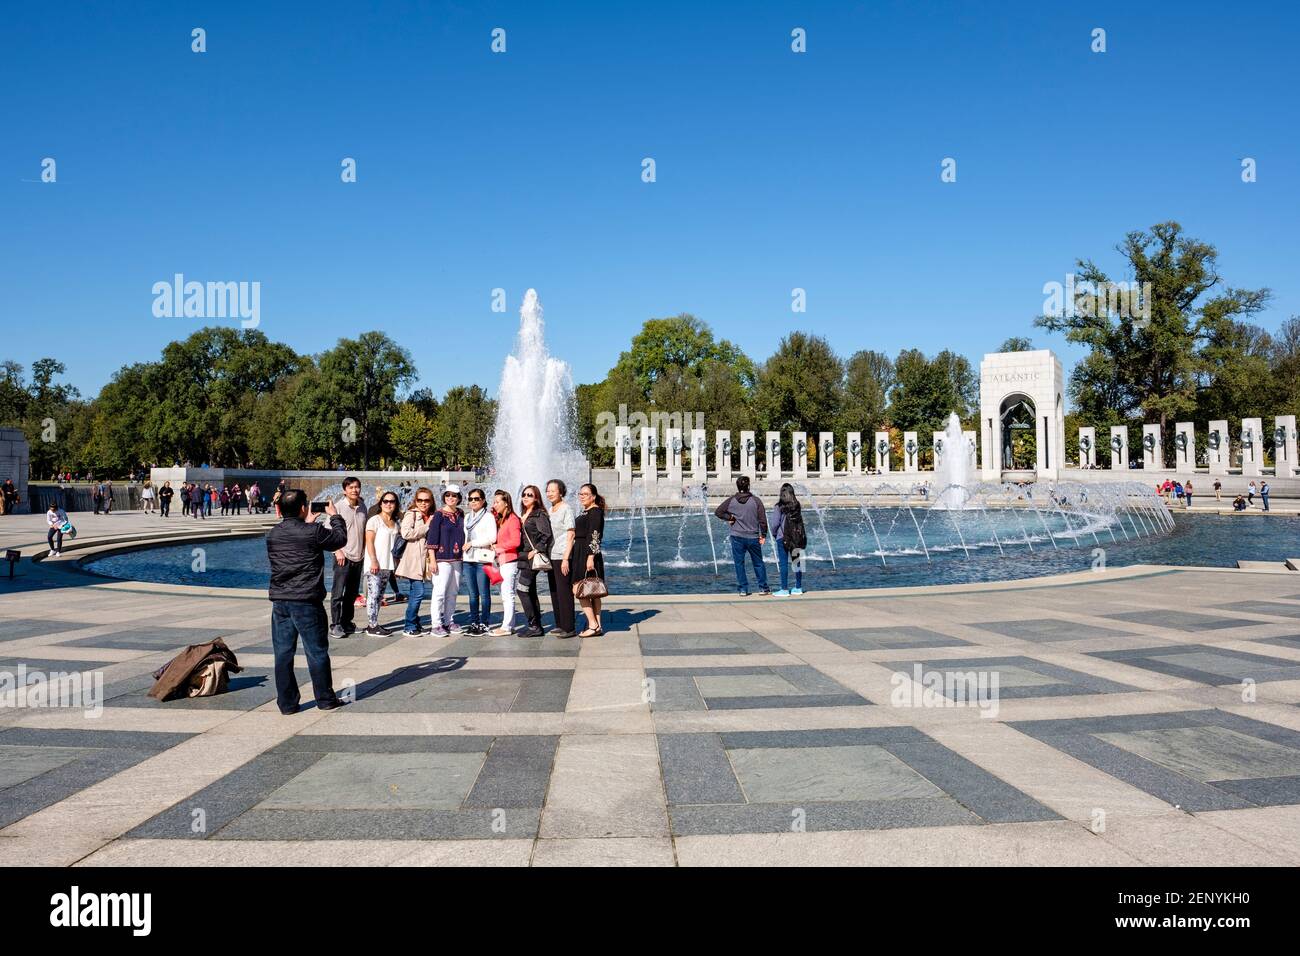 Group of Asian tourists posing for a photo at the World War II Memorial water fountain, National Mall, Washington D.C., USA. Stock Photo